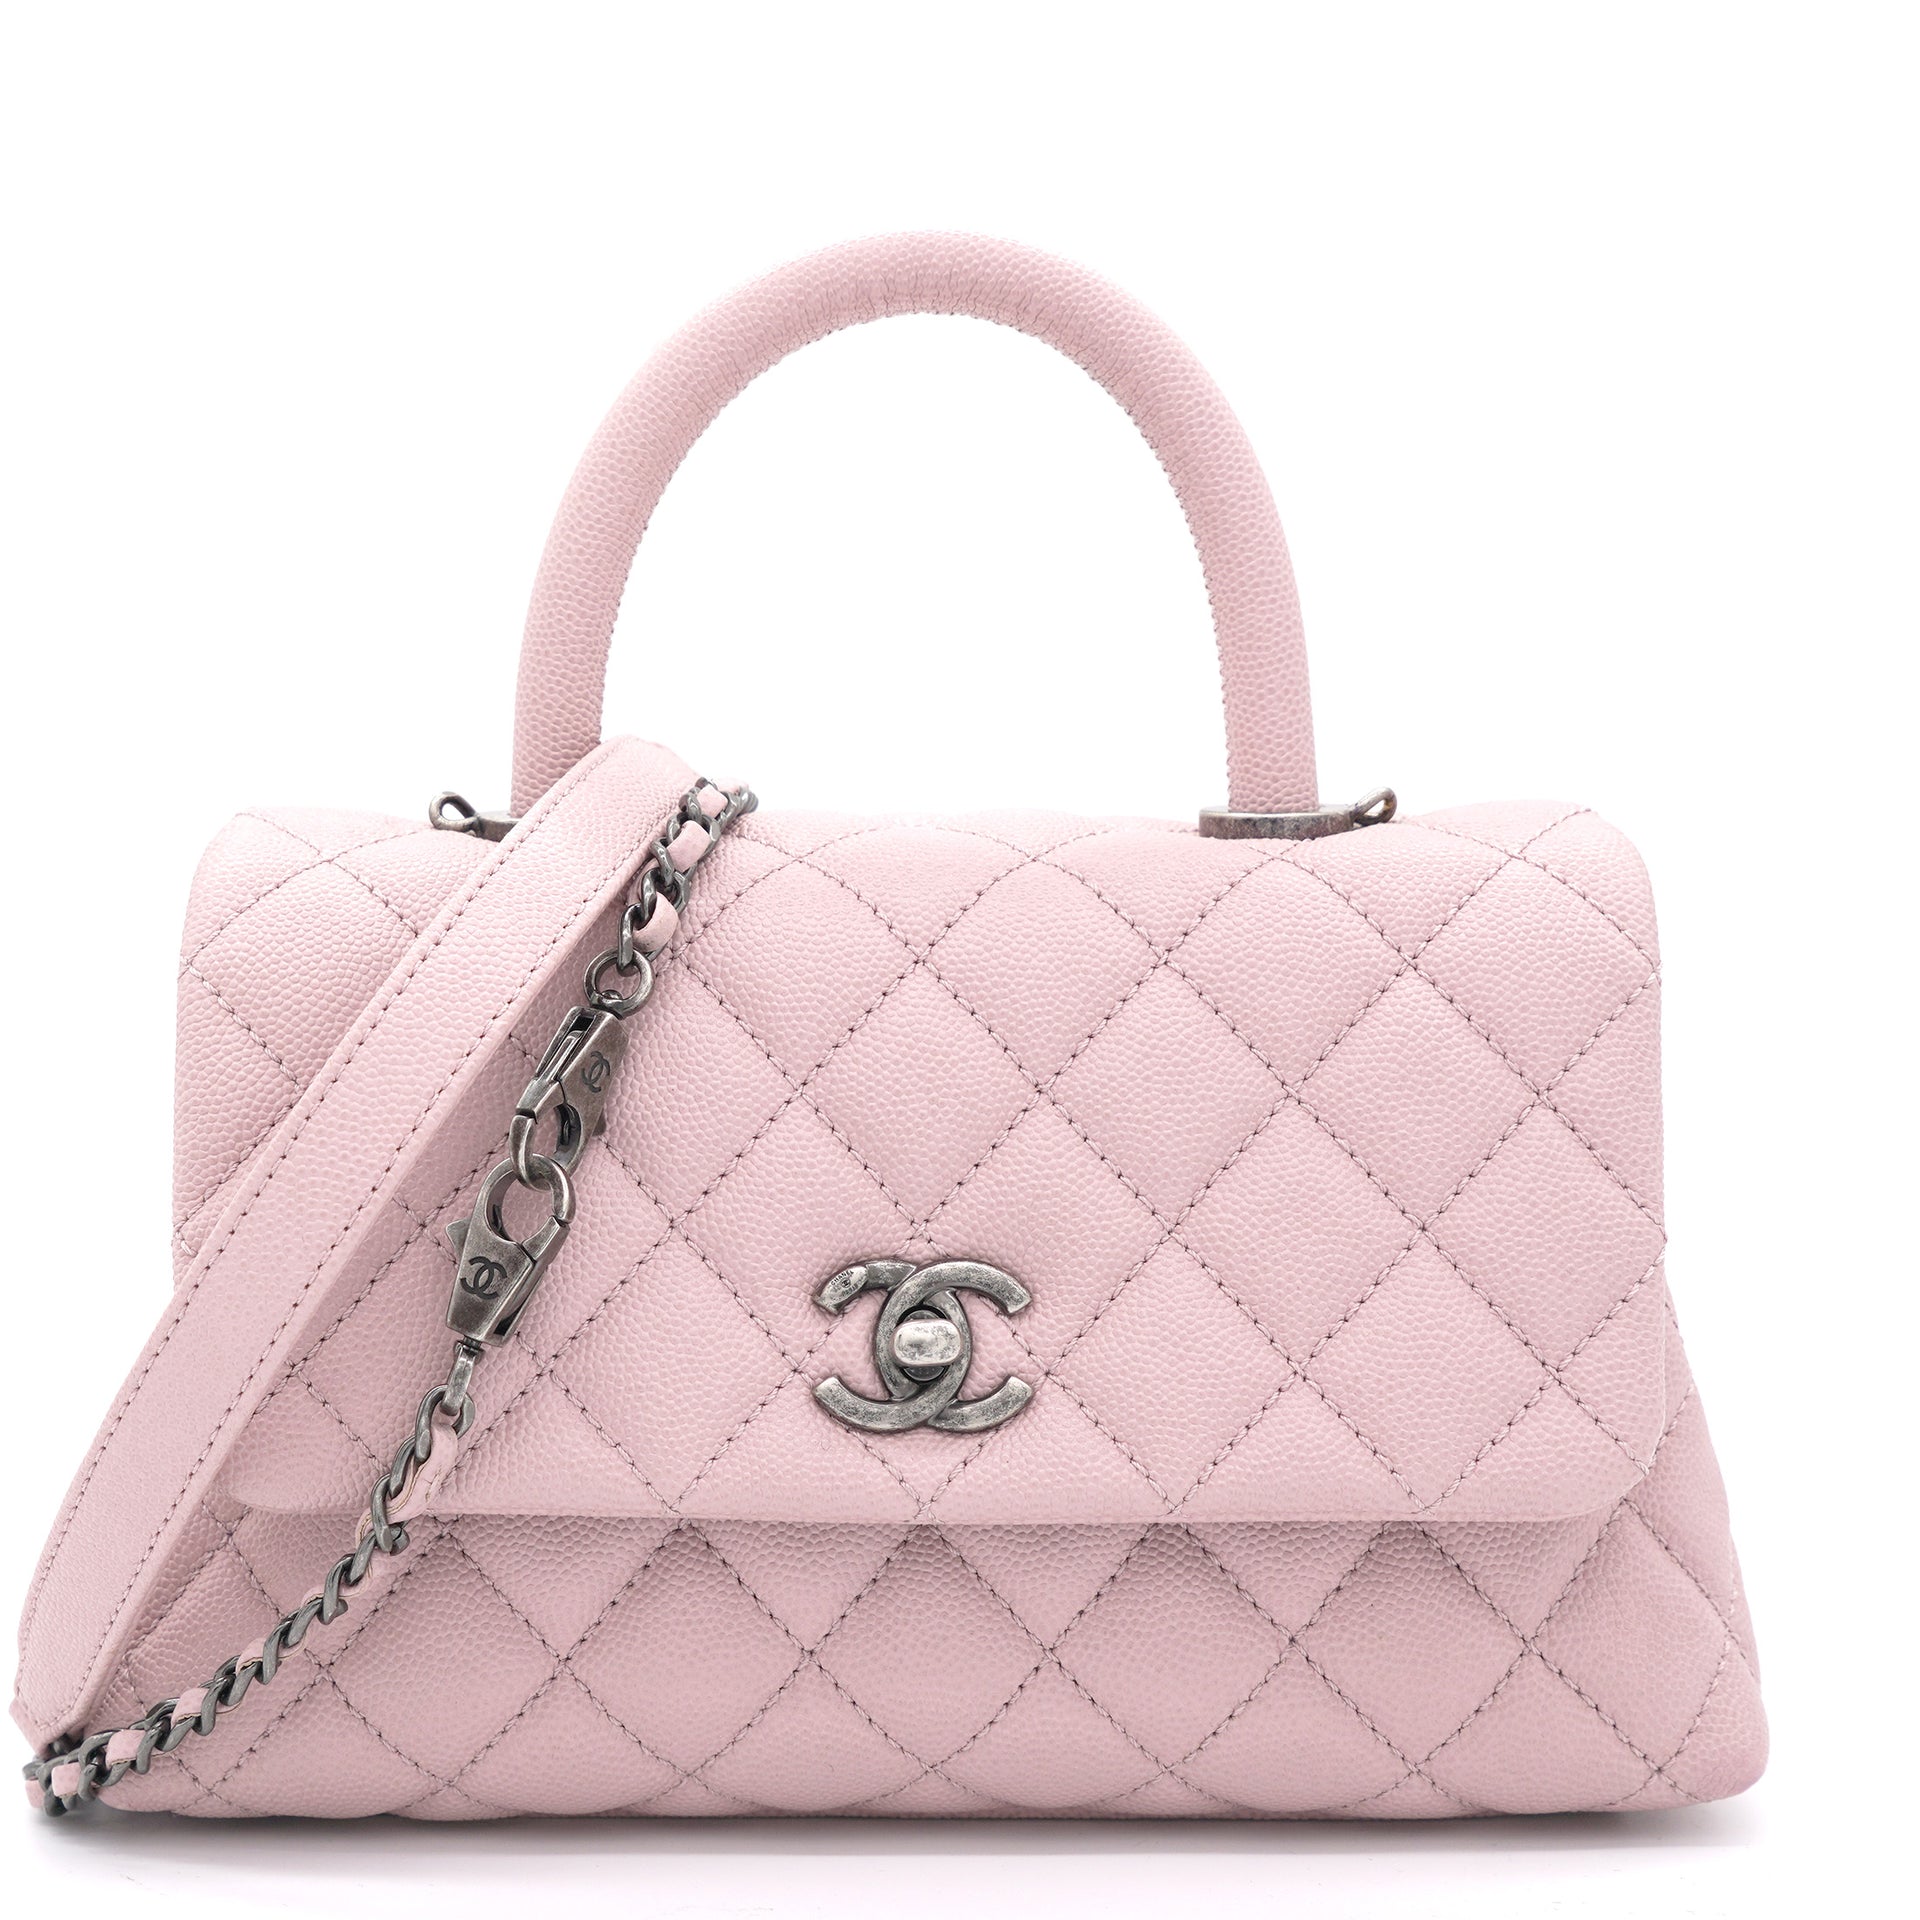 2019 Chanel Pink Quilted Caviar Leather Small Coco Handle